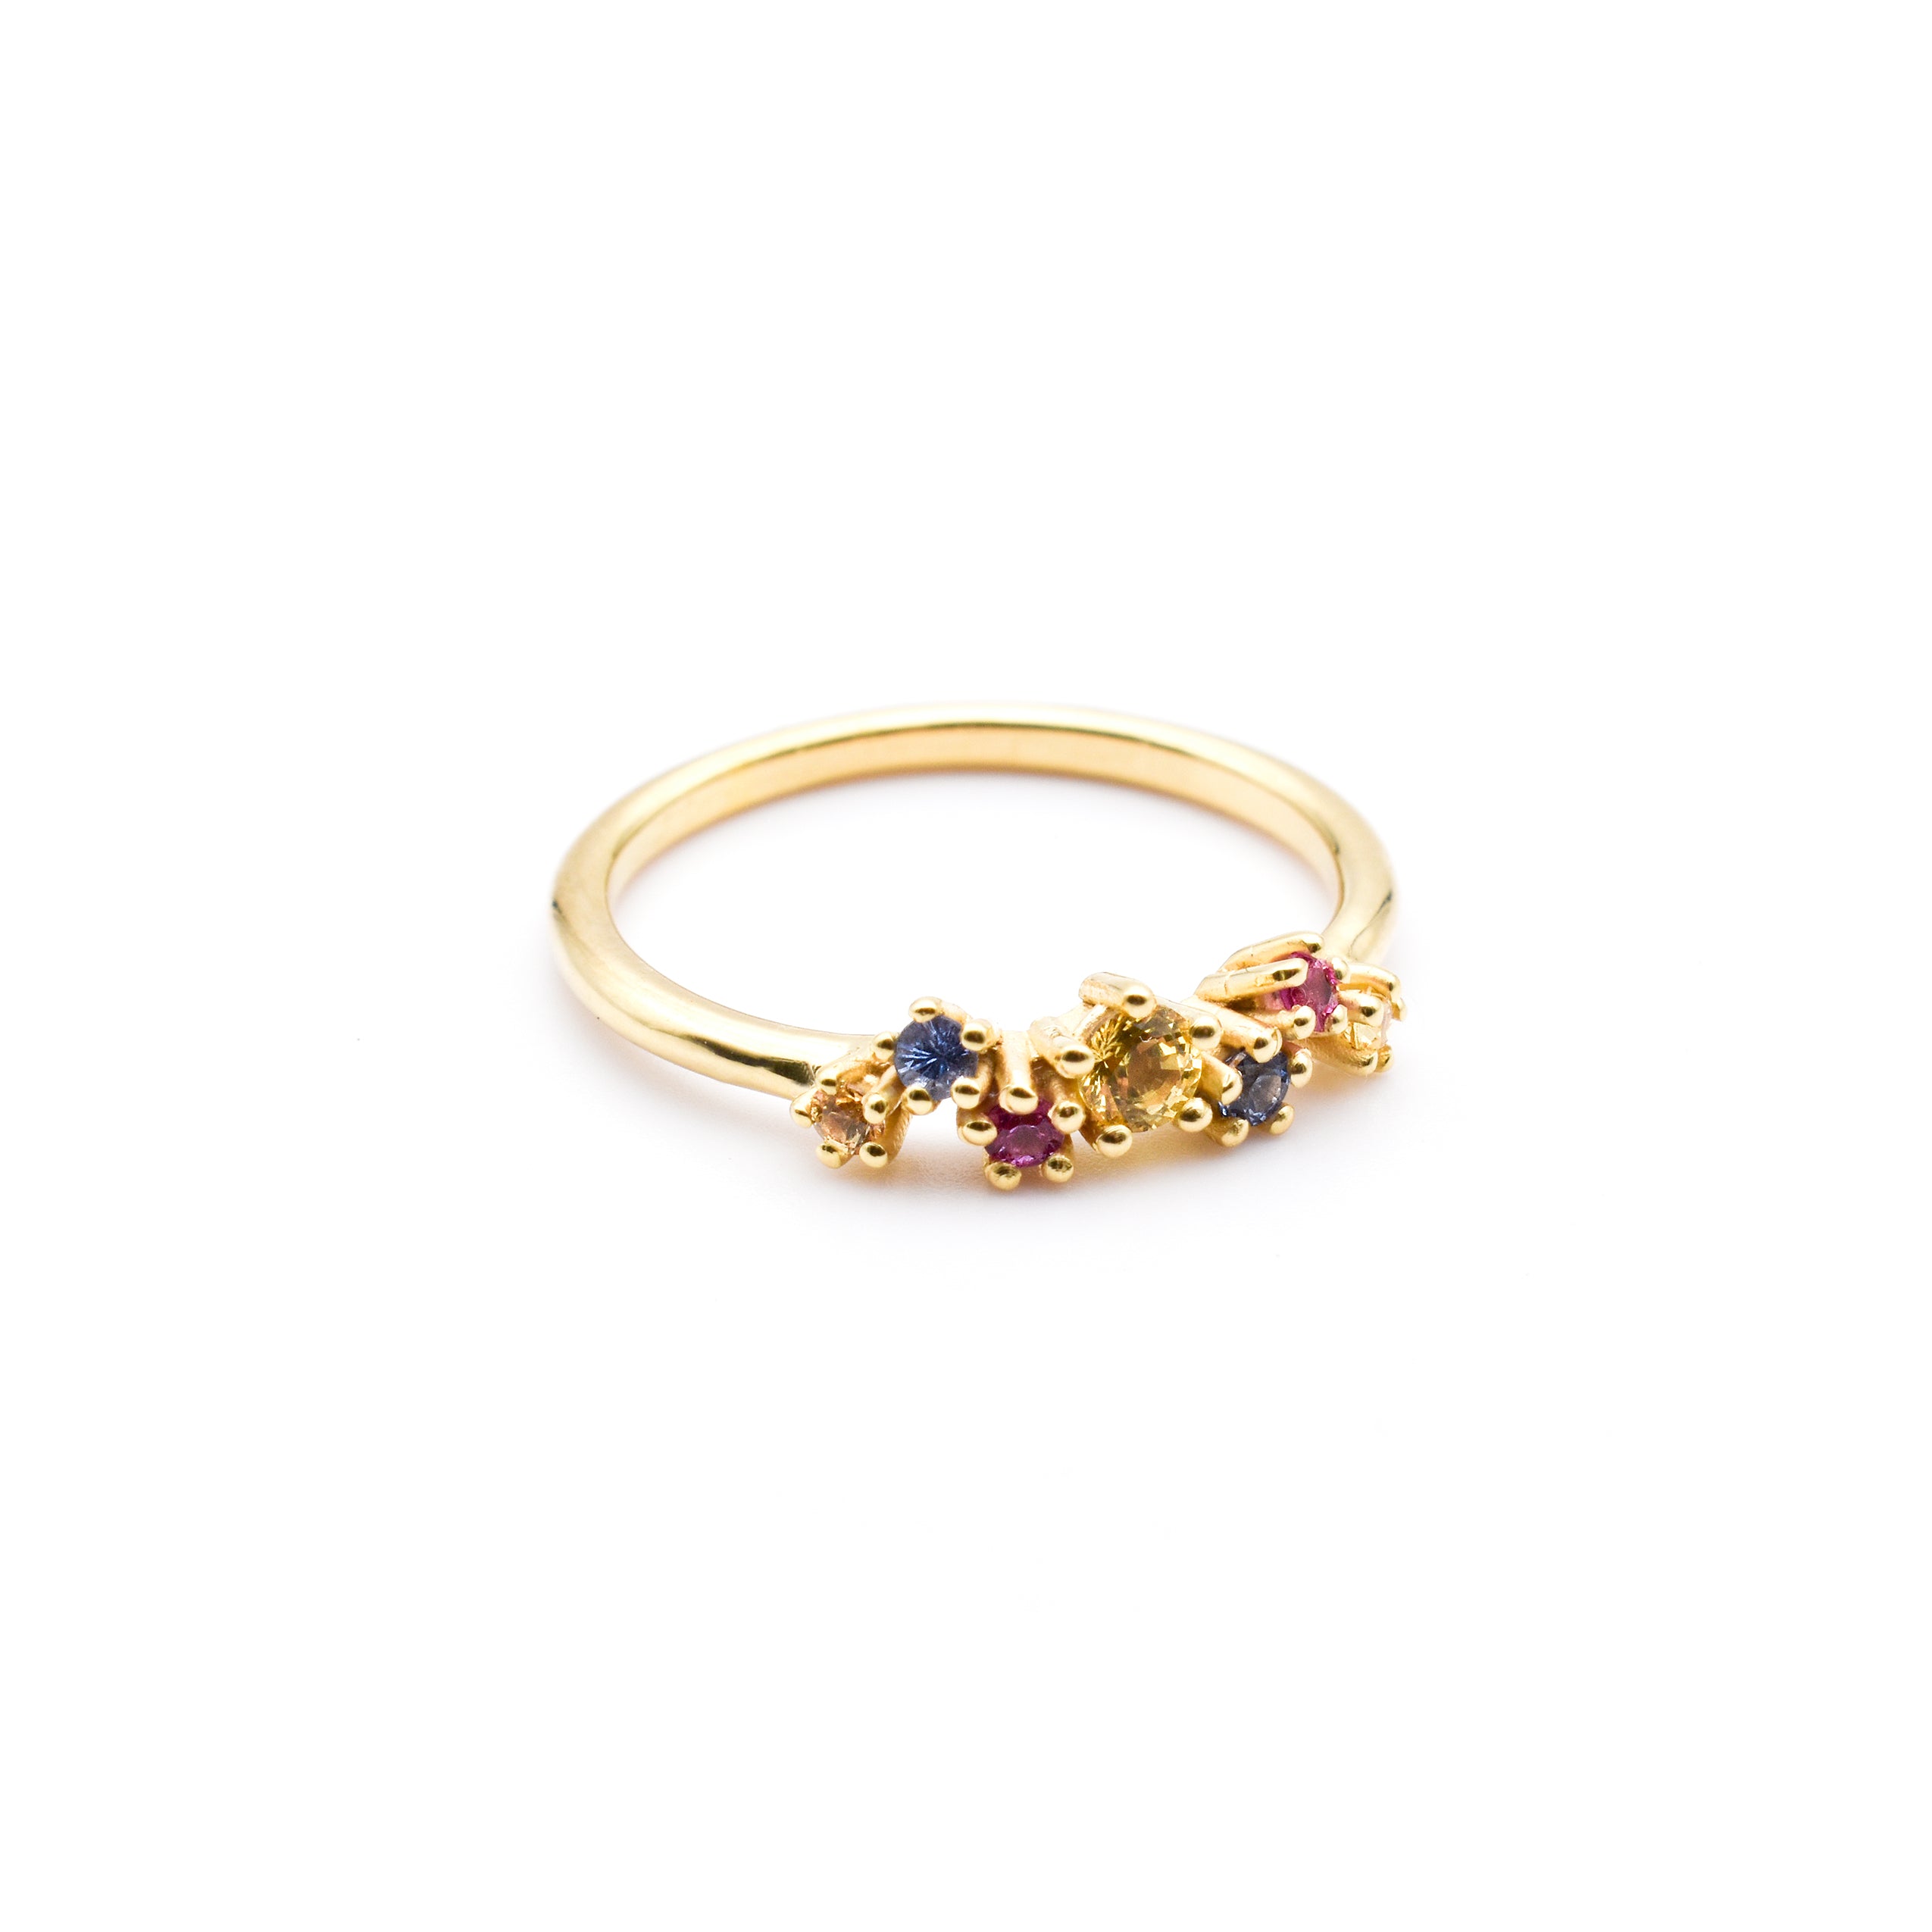 Sparkle ring "big" in 585 gold with 7 sapphires